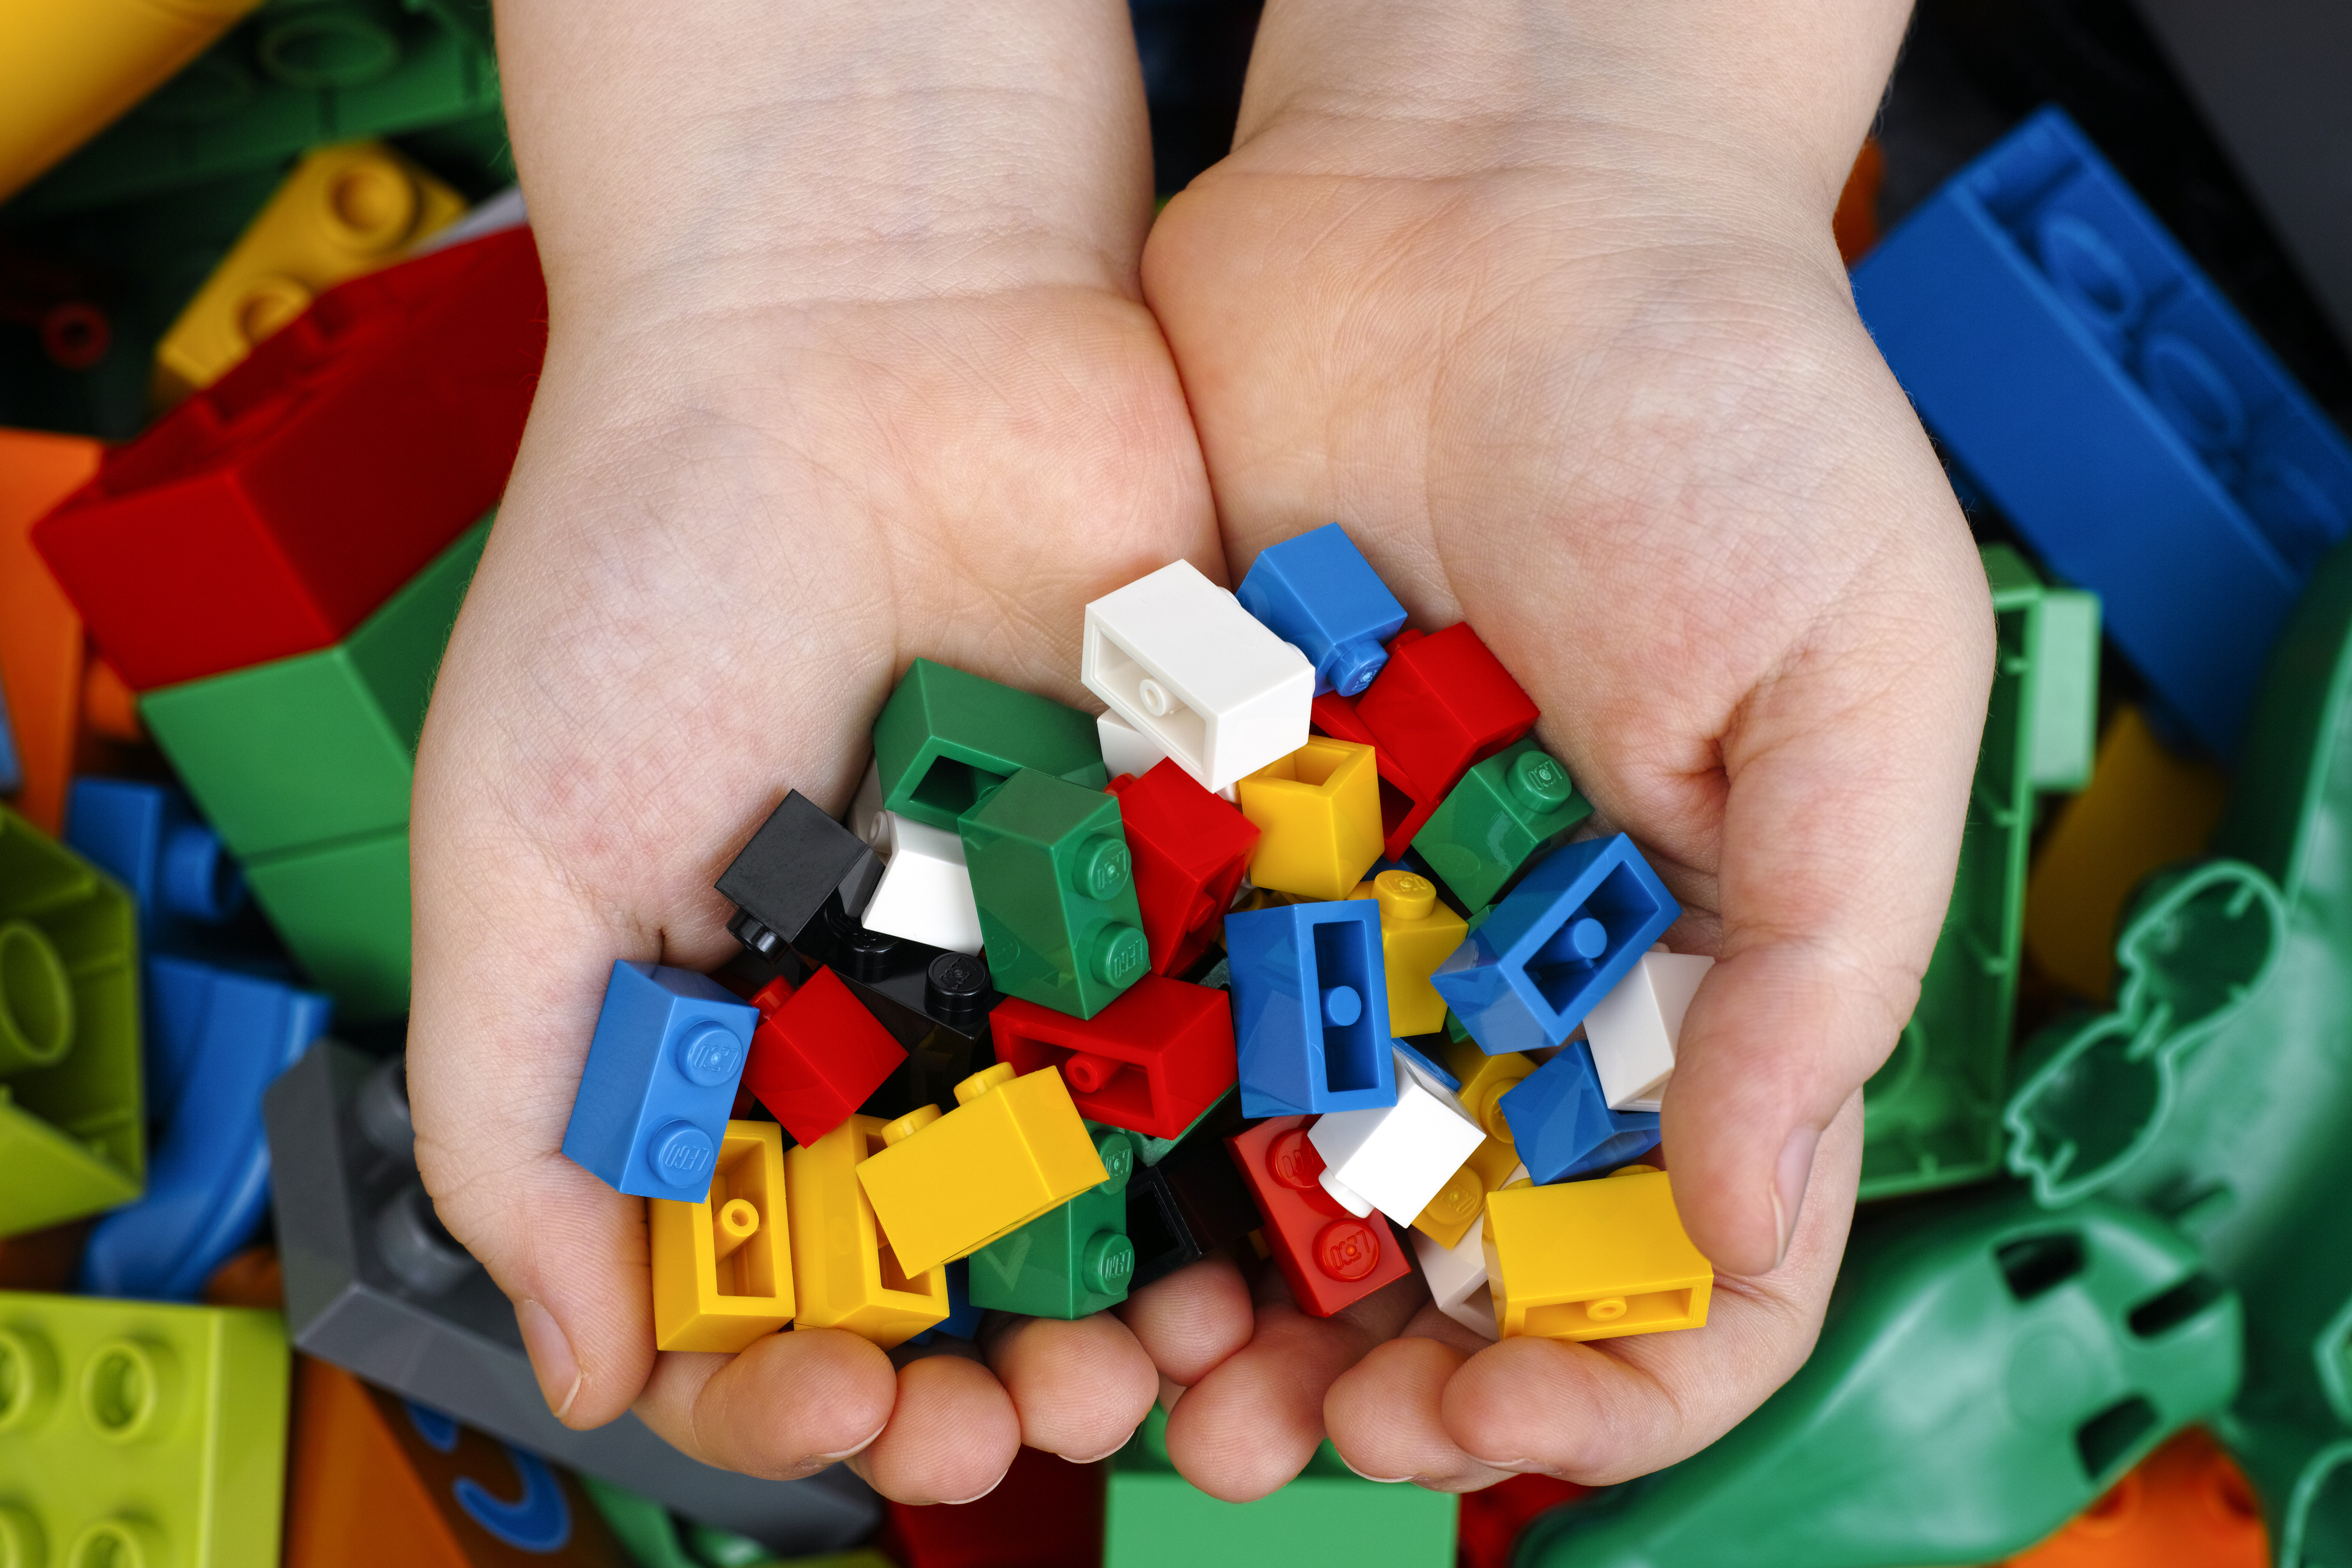 Two hands holding a variety of Lego bricks over a scattered assortment on a surface